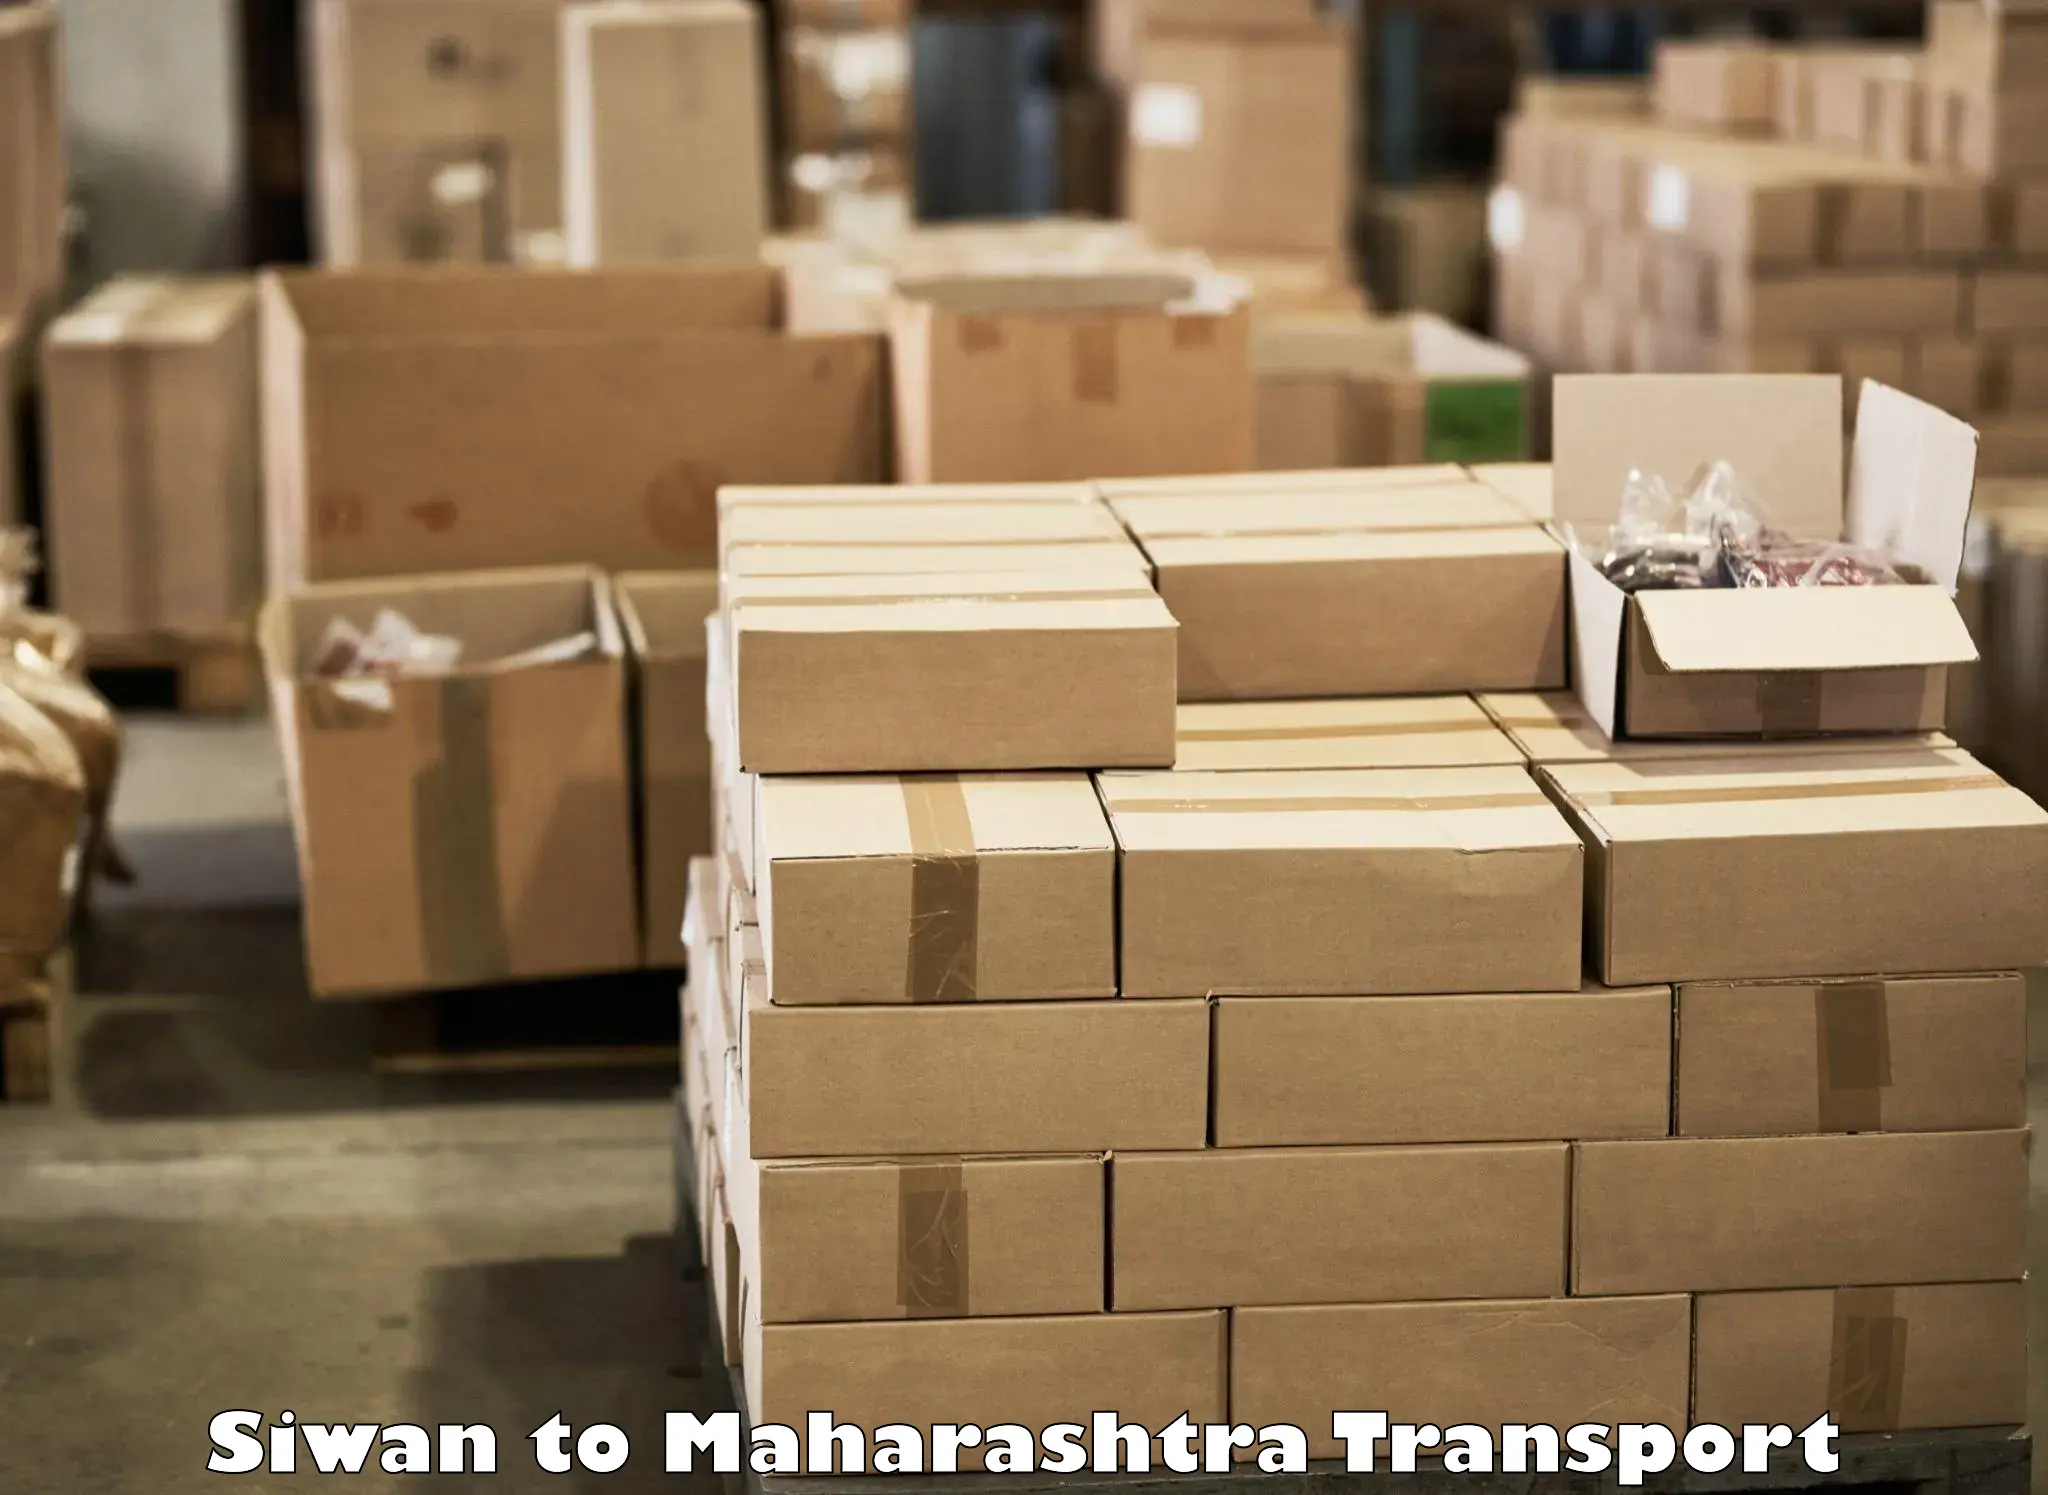 Container transport service Siwan to Koregaon